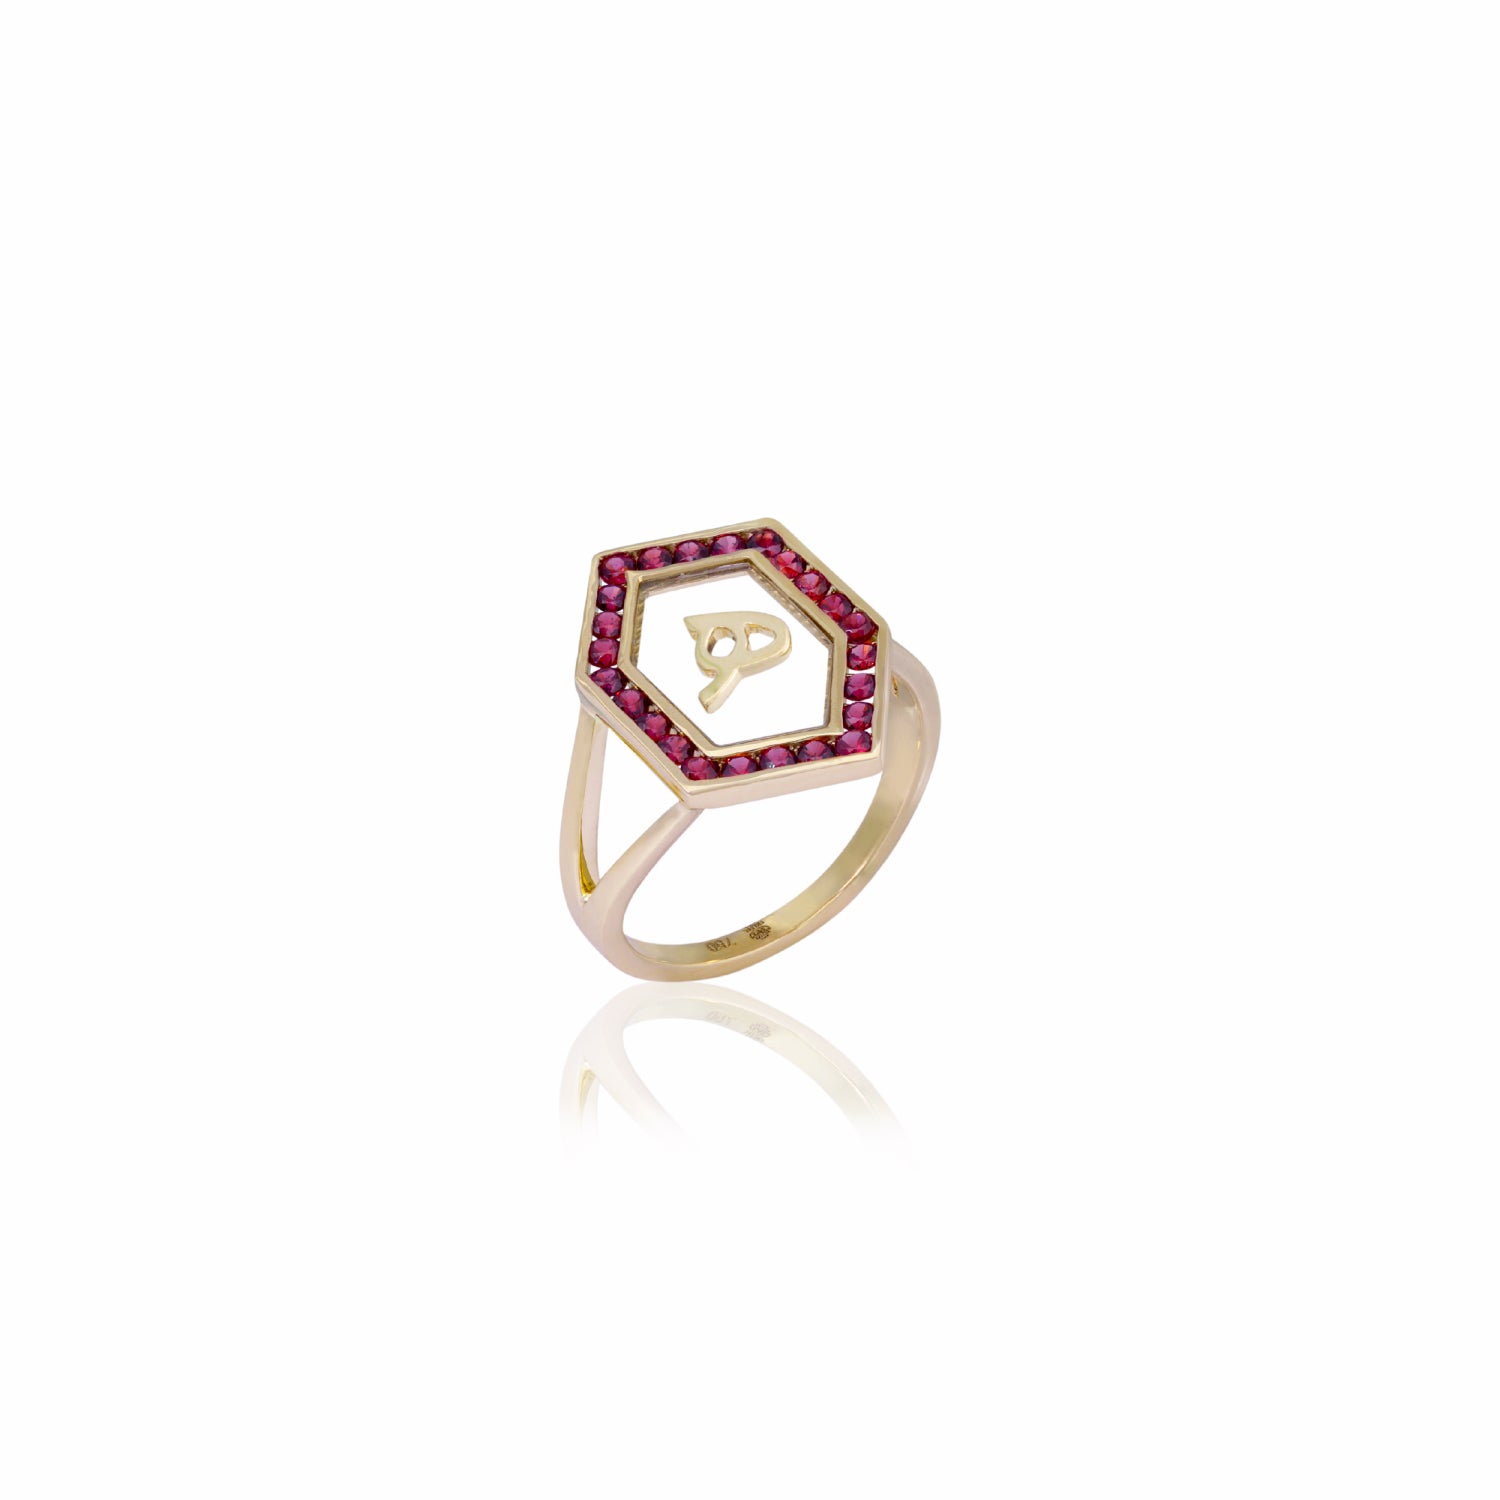 Qamoos 1.0 Letter هـ Ruby Ring in Yellow Gold